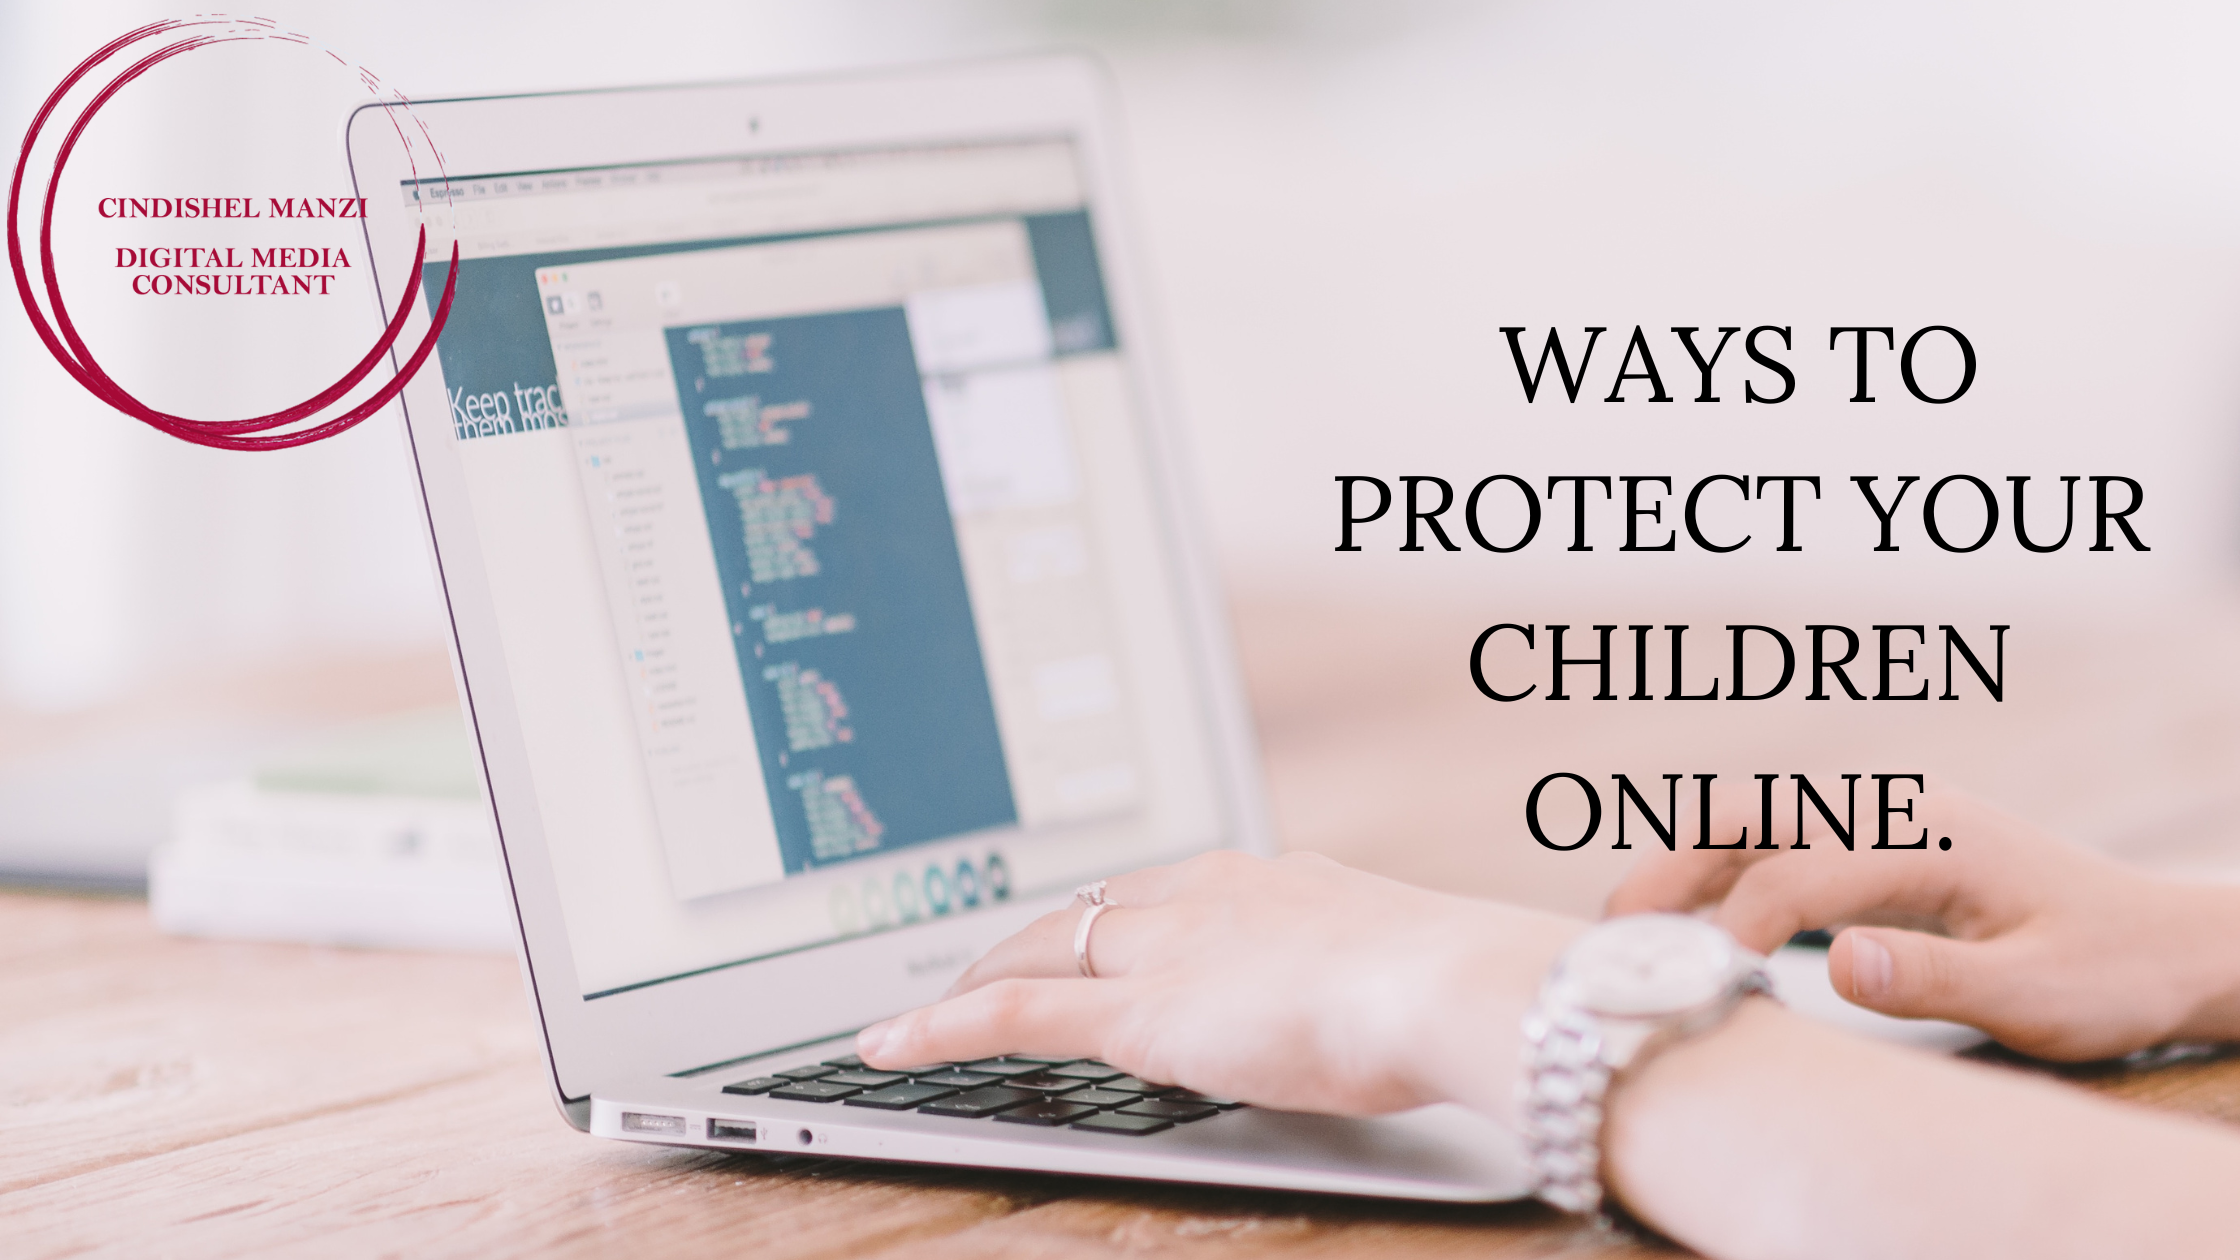 Ways to protect your children online, digital privacy, Cindishel Manzi, virtual assistant